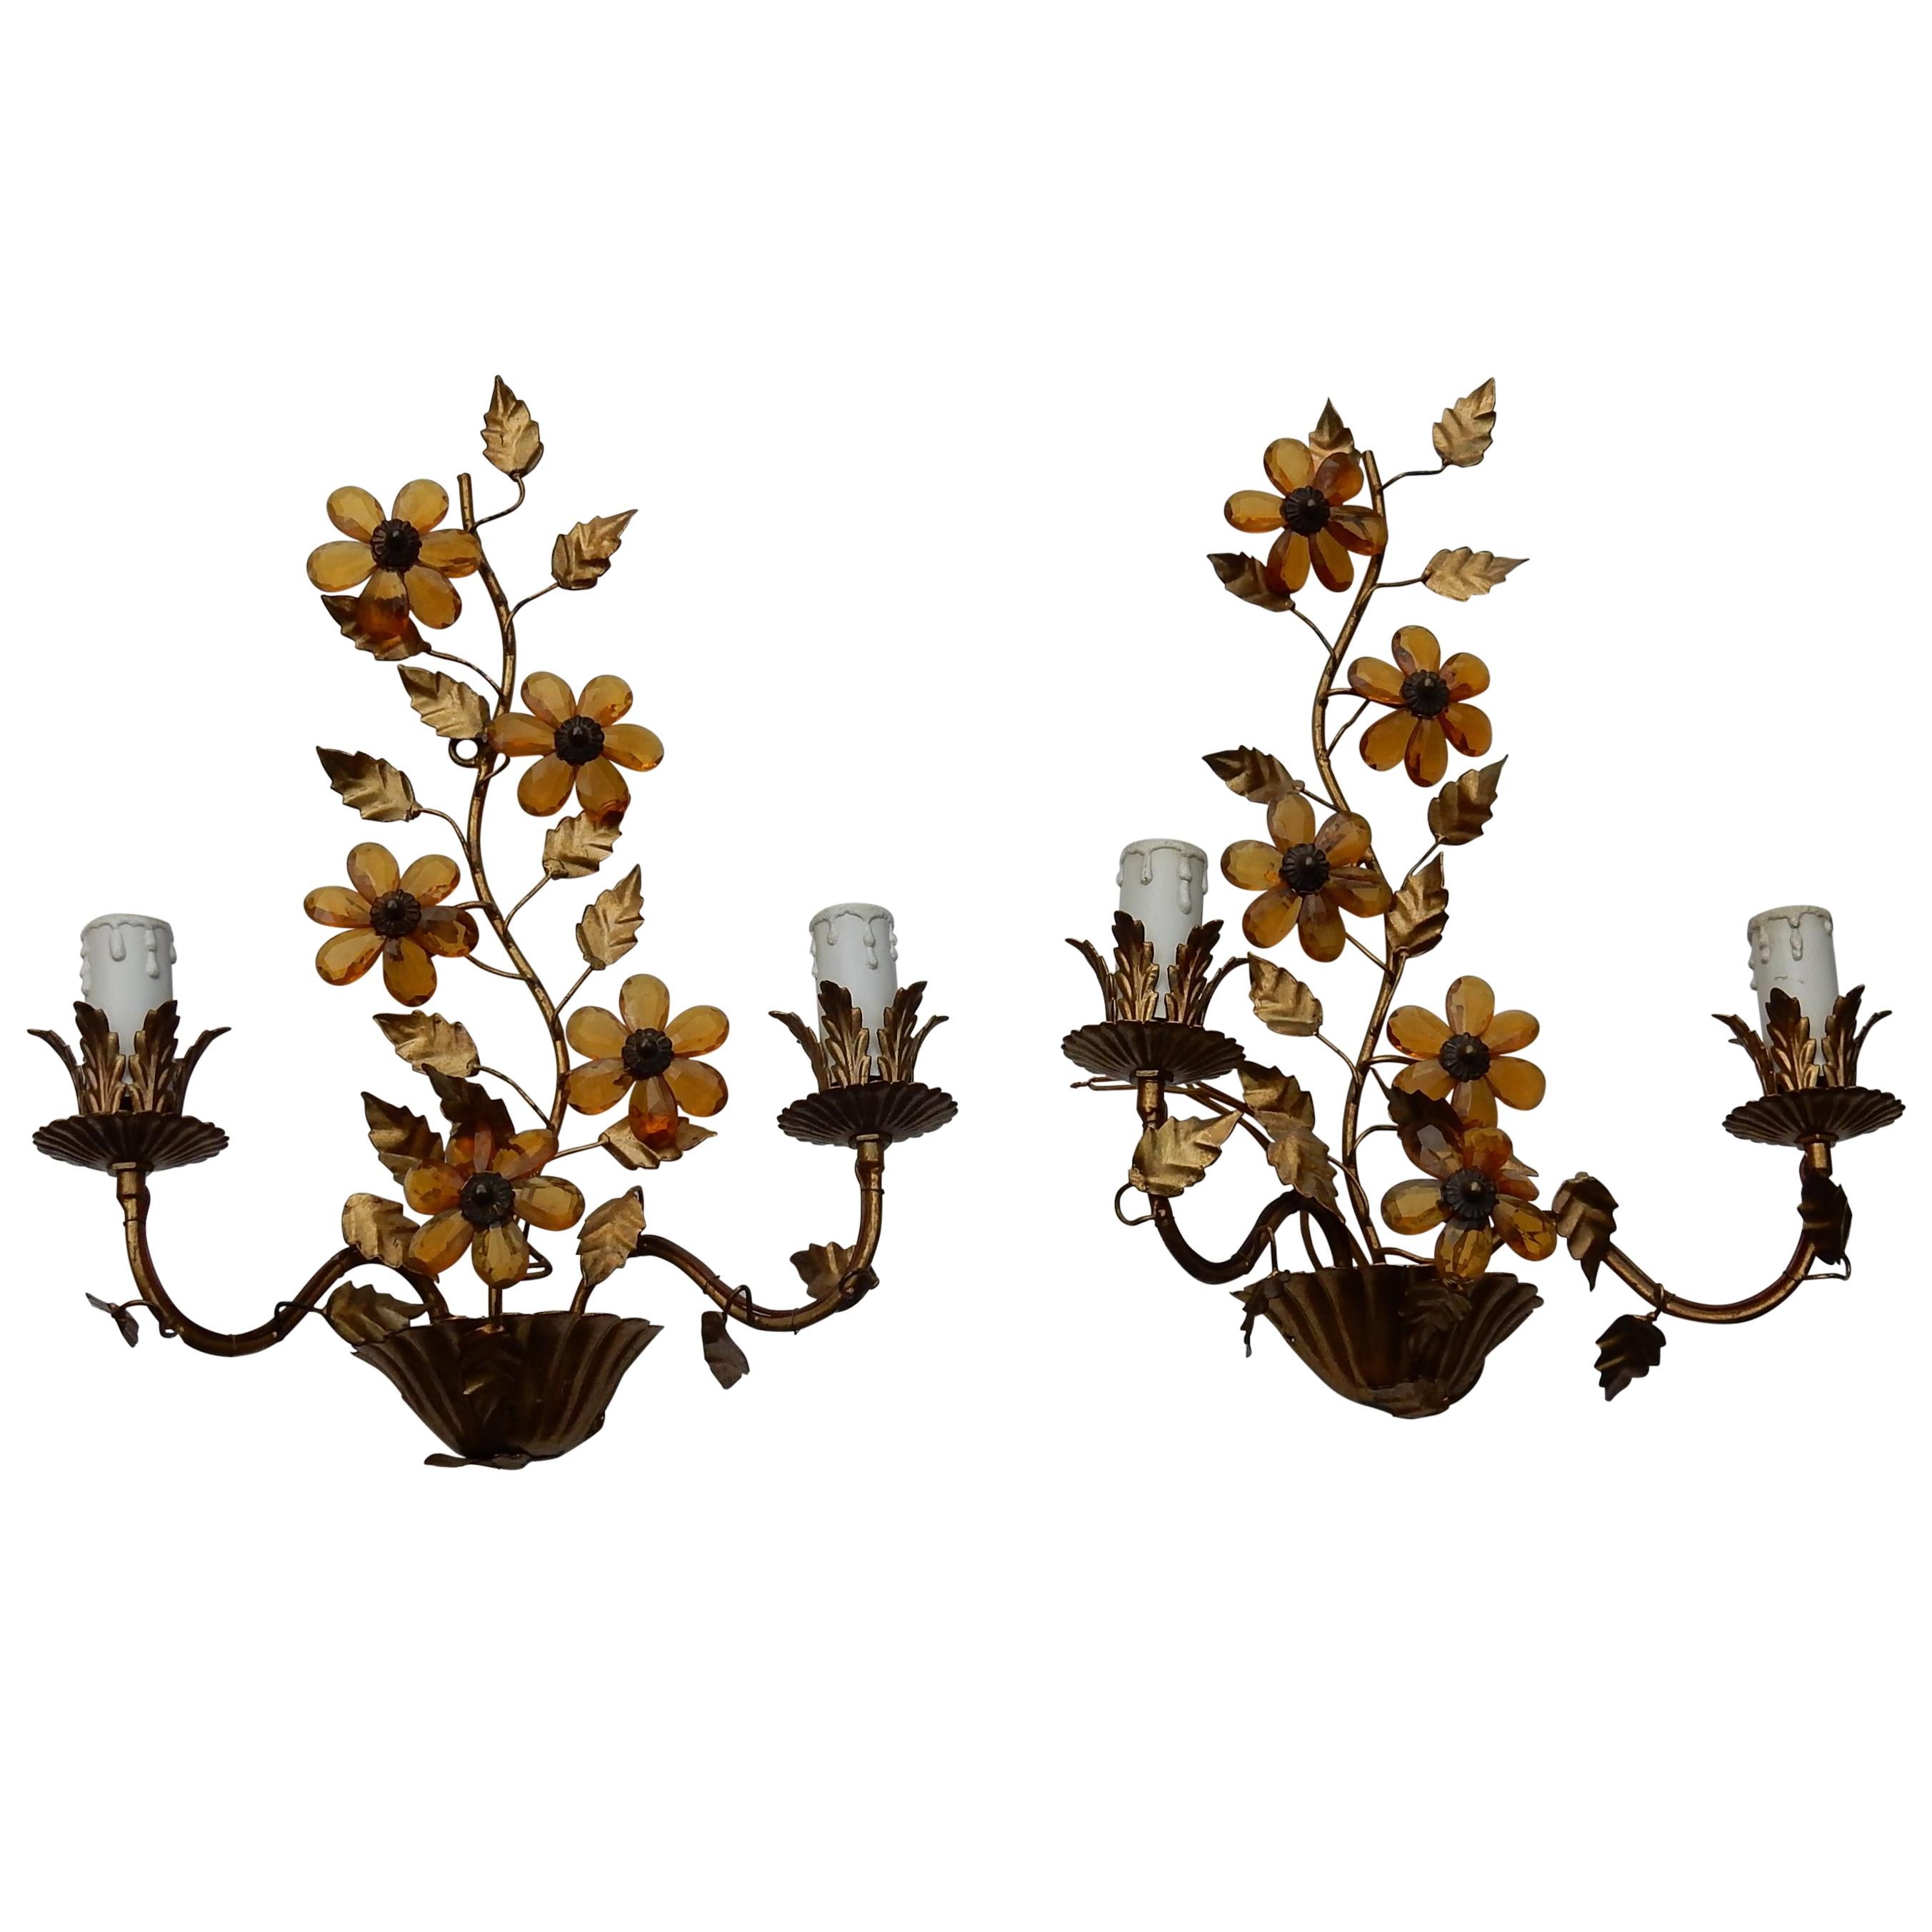 1970 Pair of Wall Lamp in the Style of Maison Baguès with Orange Color Flowers